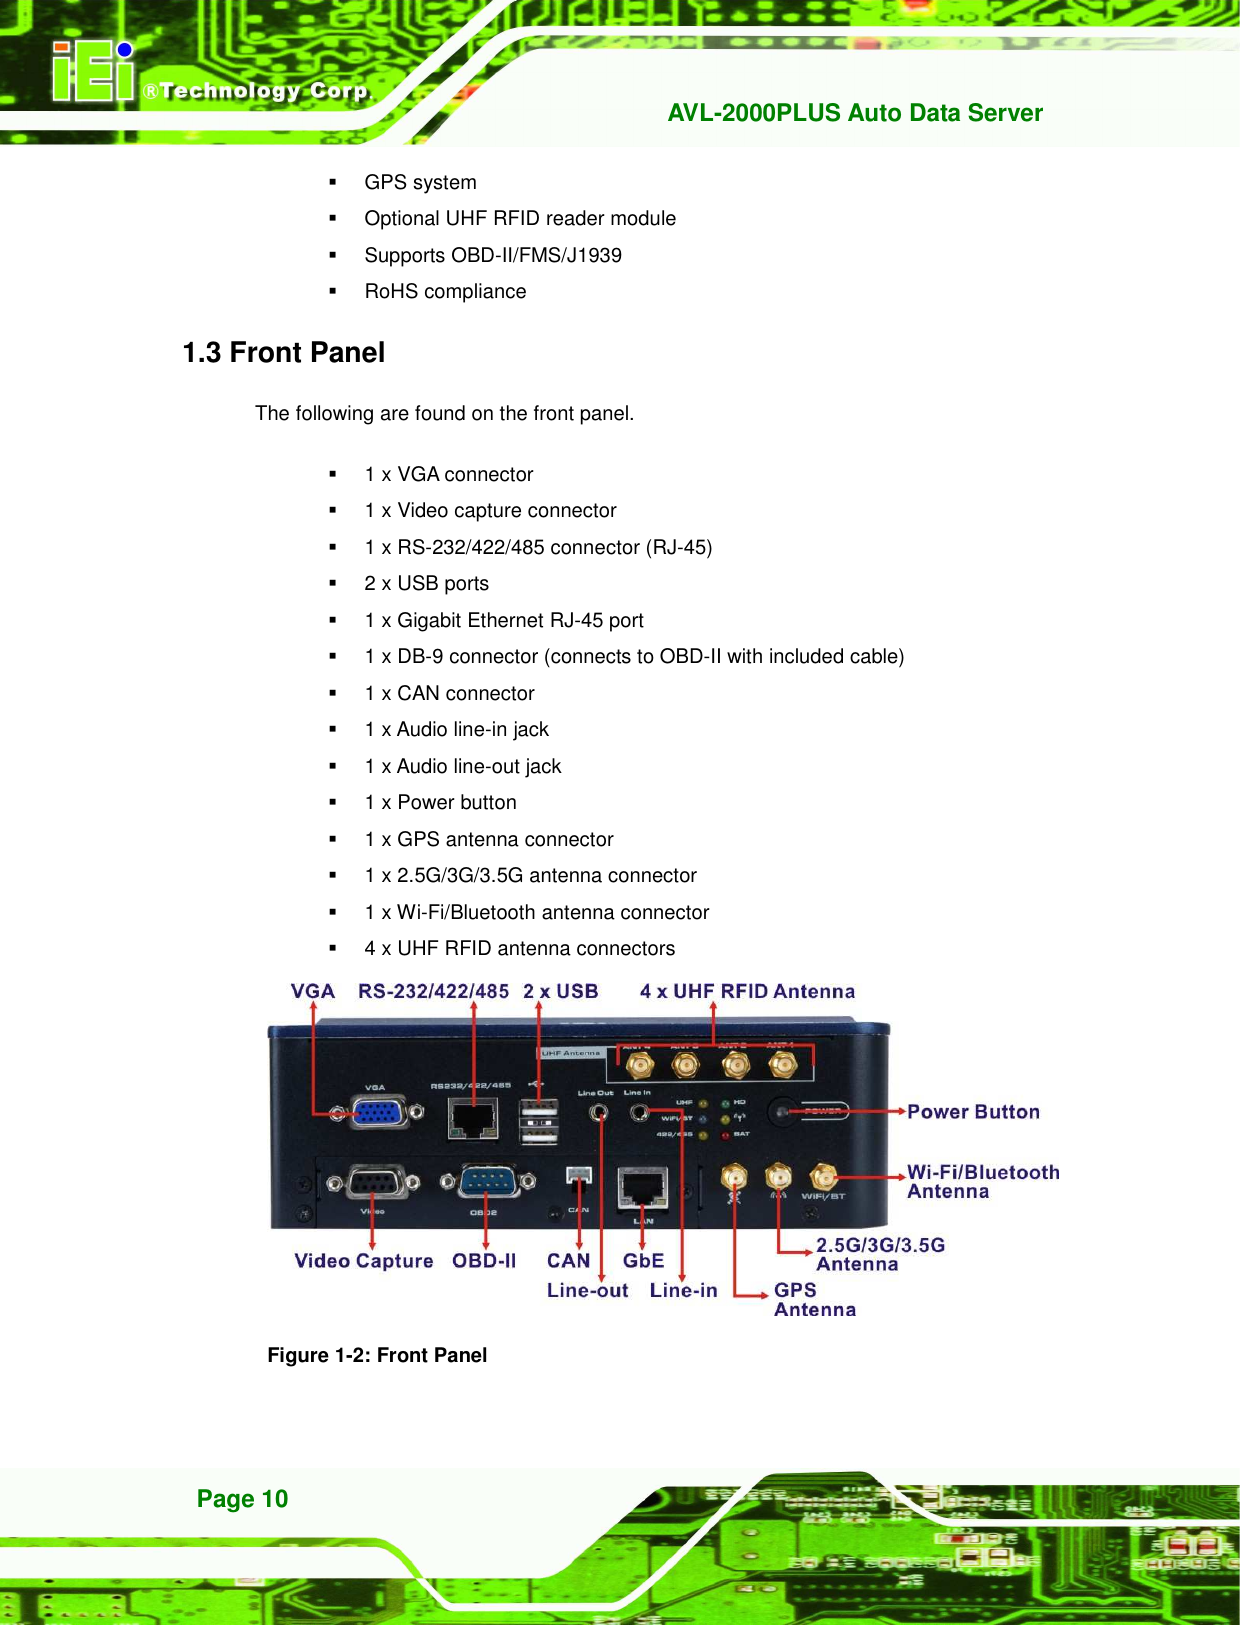   AVL-2000PLUS Auto Data Server Page 10   GPS system     Optional UHF RFID reader module   Supports OBD-II/FMS/J1939   RoHS compliance 1.3 Front Panel The following are found on the front panel.   1 x VGA connector     1 x Video capture connector   1 x RS-232/422/485 connector (RJ-45)     2 x USB ports   1 x Gigabit Ethernet RJ-45 port   1 x DB-9 connector (connects to OBD-II with included cable)   1 x CAN connector   1 x Audio line-in jack   1 x Audio line-out jack   1 x Power button   1 x GPS antenna connector   1 x 2.5G/3G/3.5G antenna connector   1 x Wi-Fi/Bluetooth antenna connector   4 x UHF RFID antenna connectors  Figure 1-2: Front Panel 